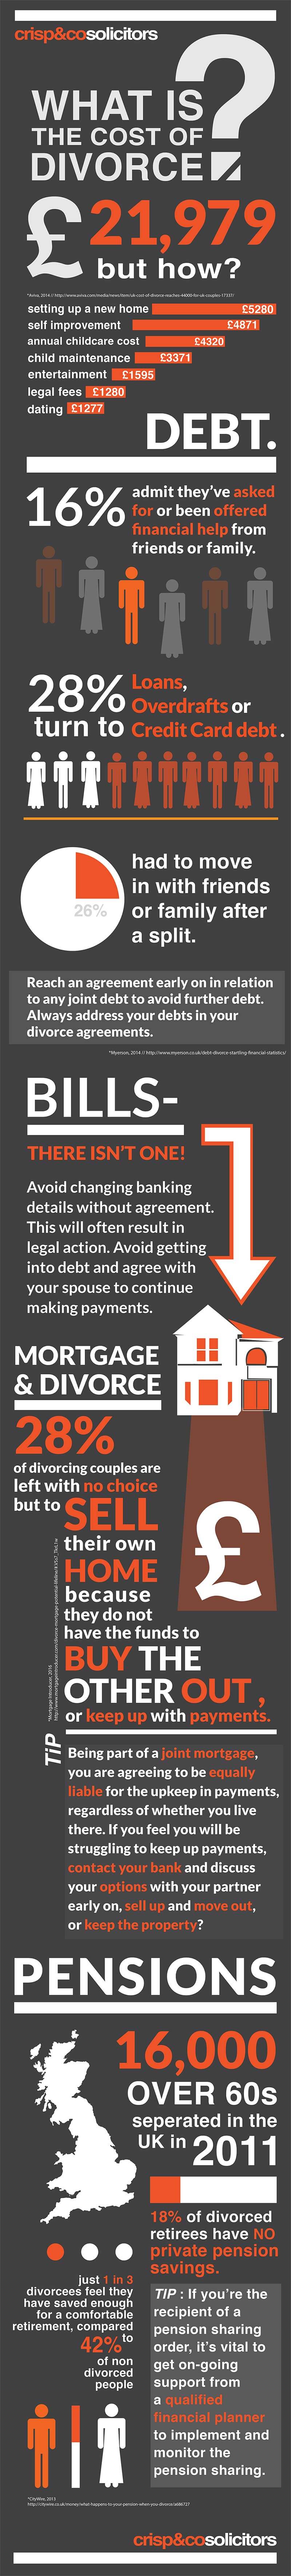 infographic that breaks down the cost of divorce and the mechanisms involved